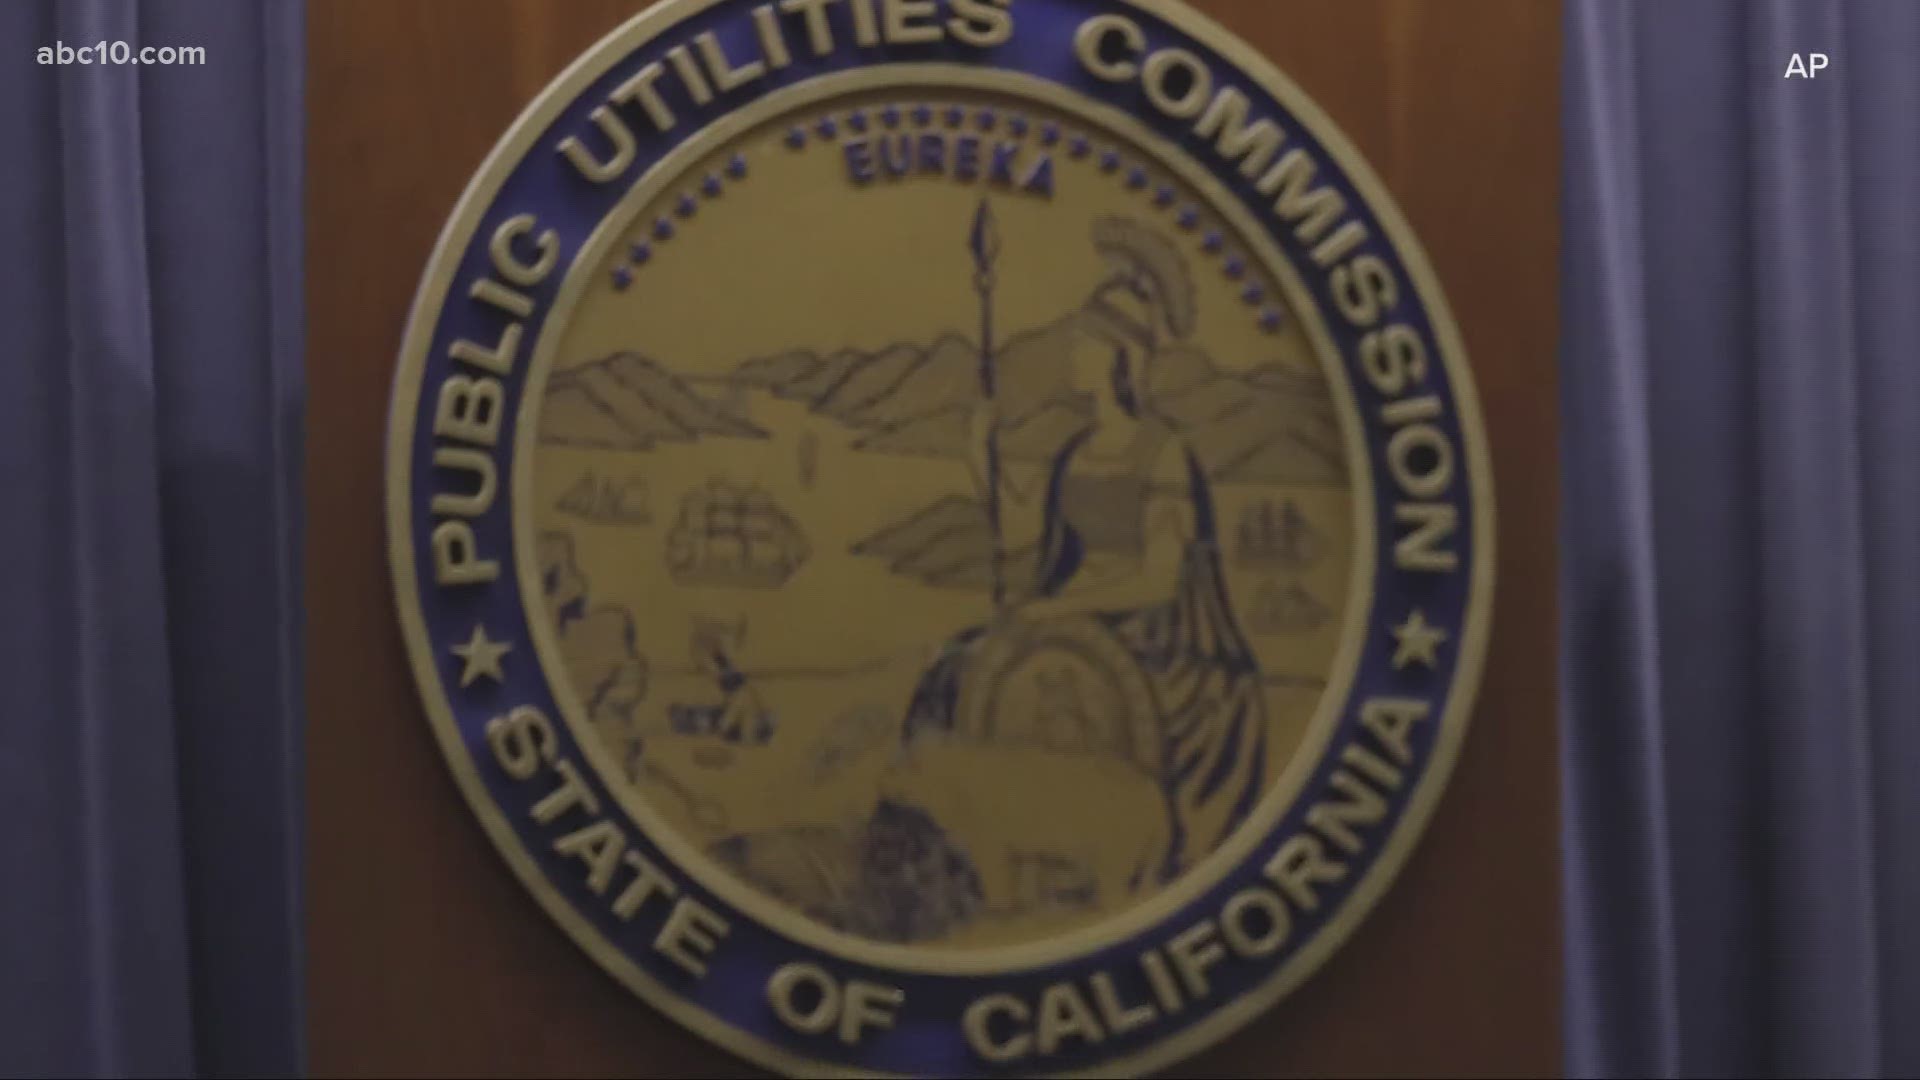 The Executive Director of California's public utilities commission demanded to have her firing done in public, while going public as a whistleblower.